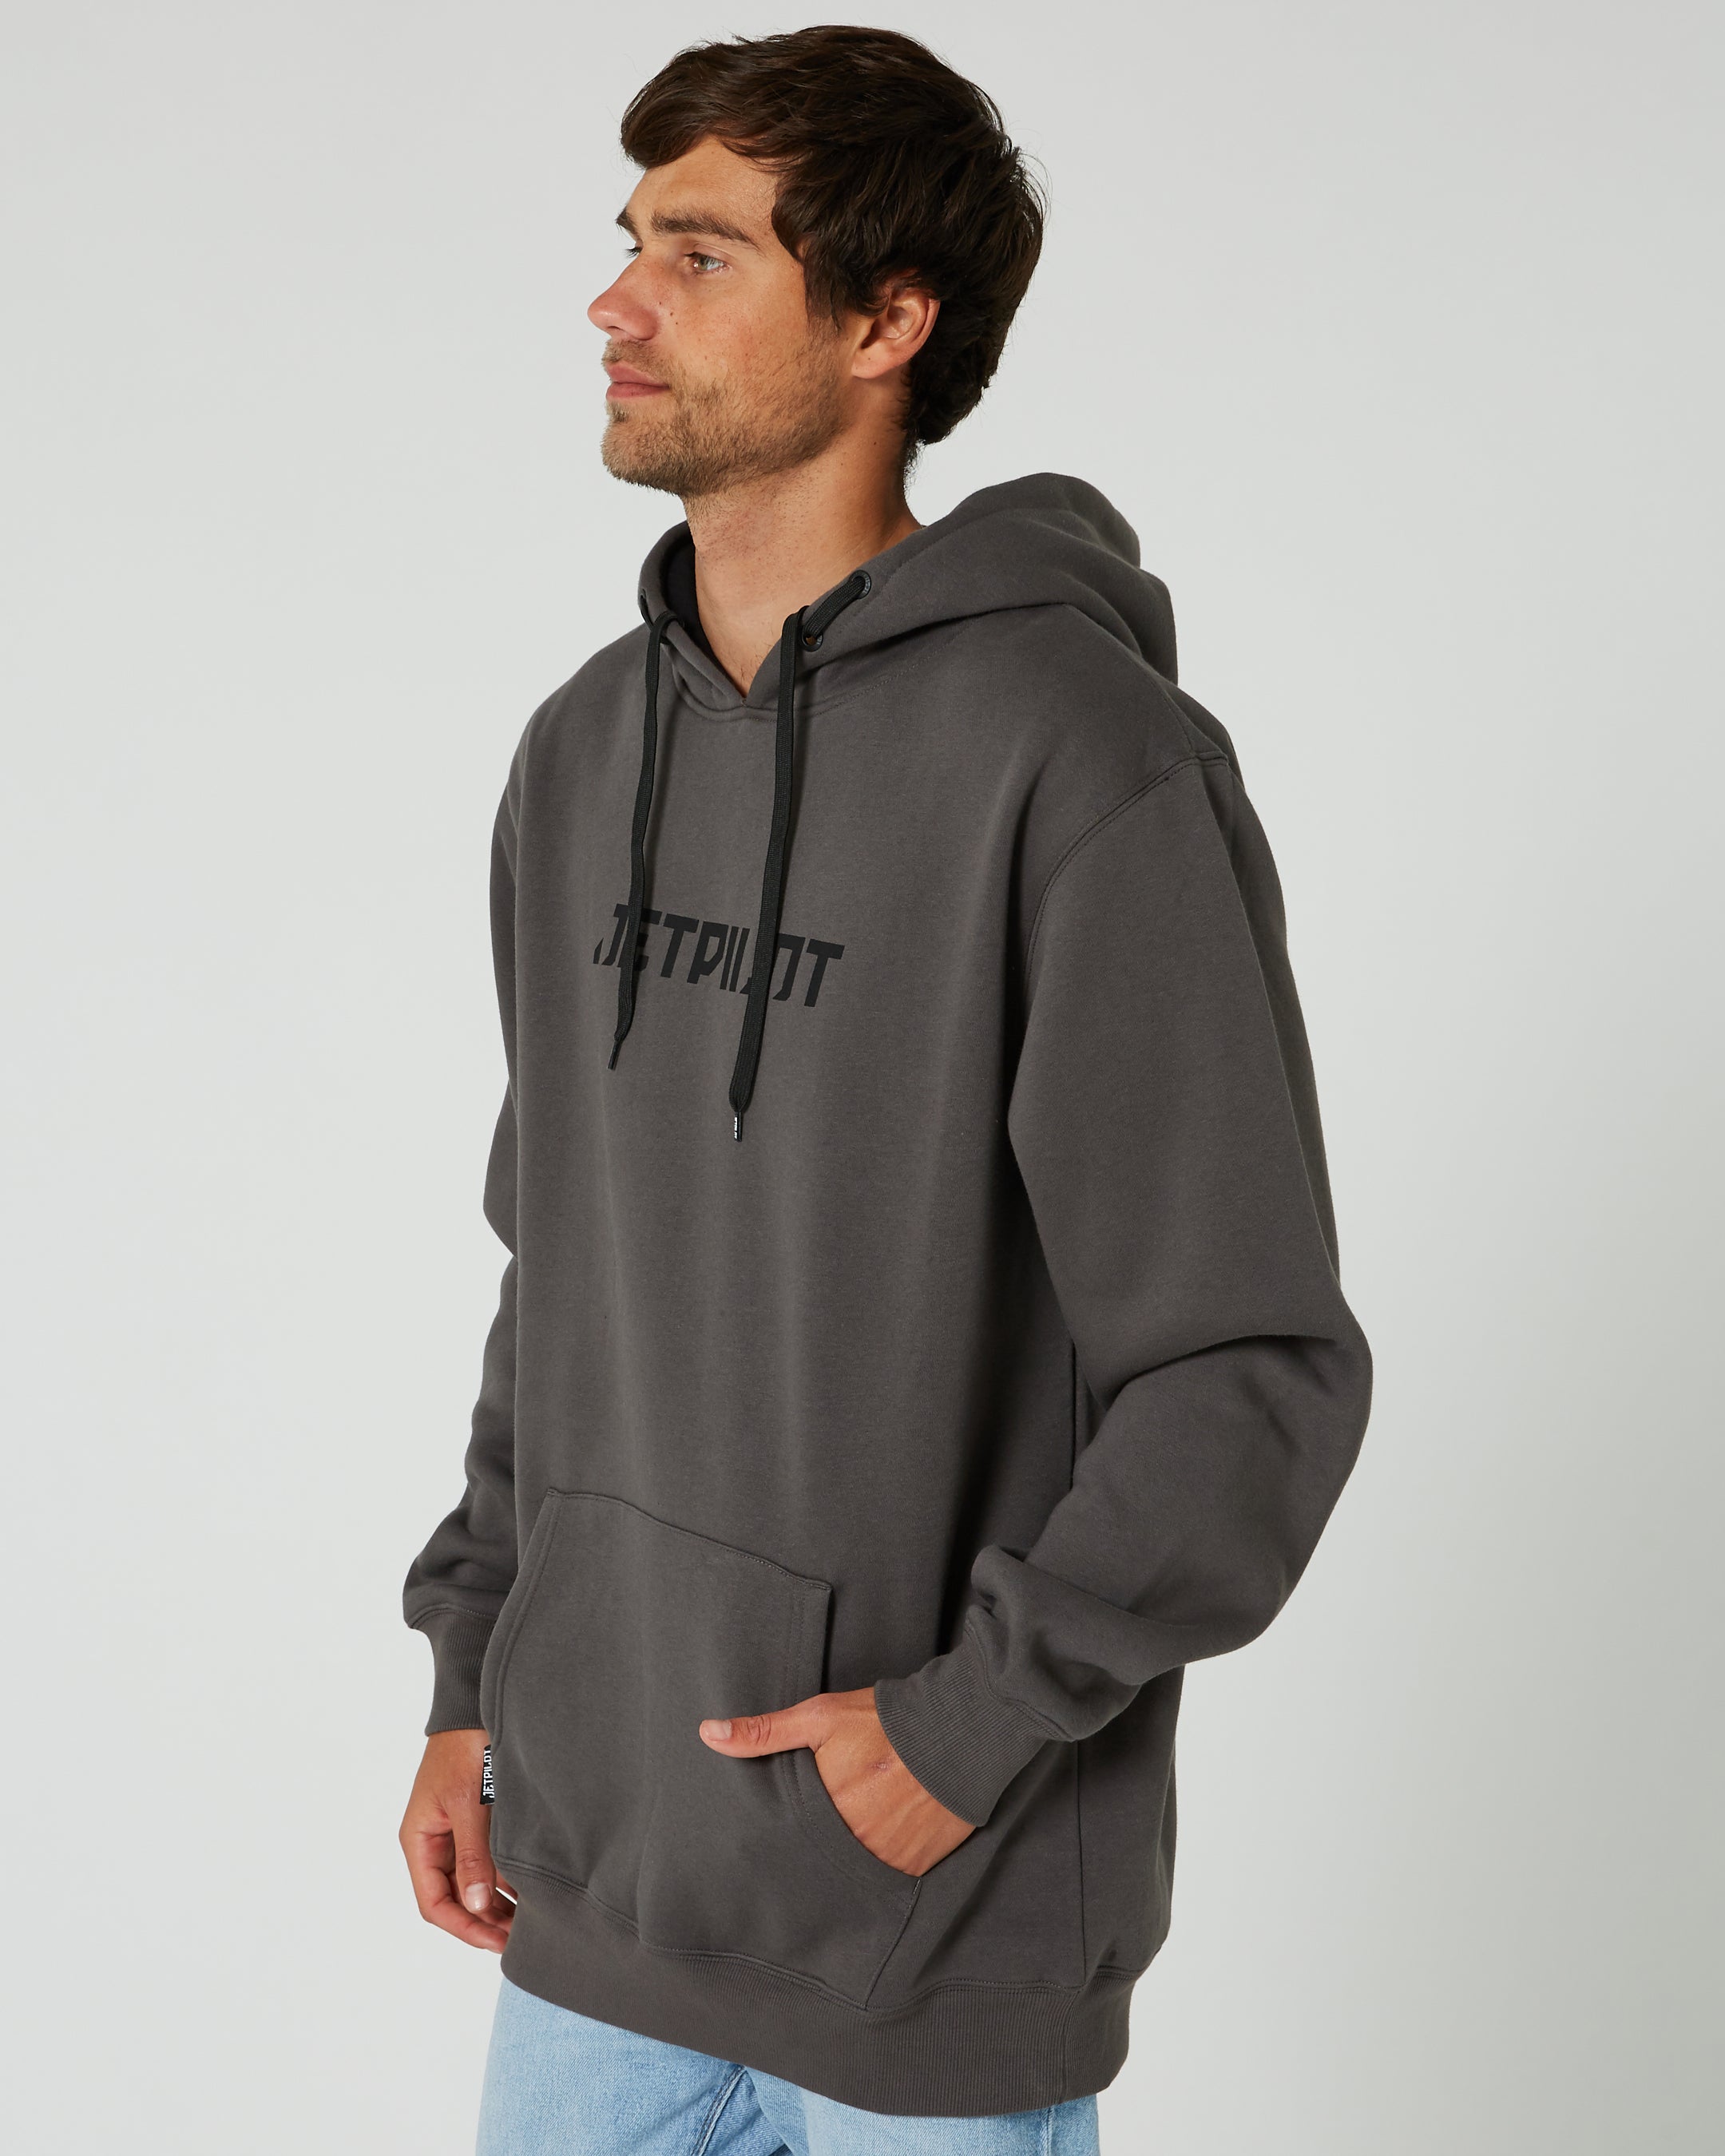 Jetpilot Cause Mens Pullover Hoodie - Charcoal 2